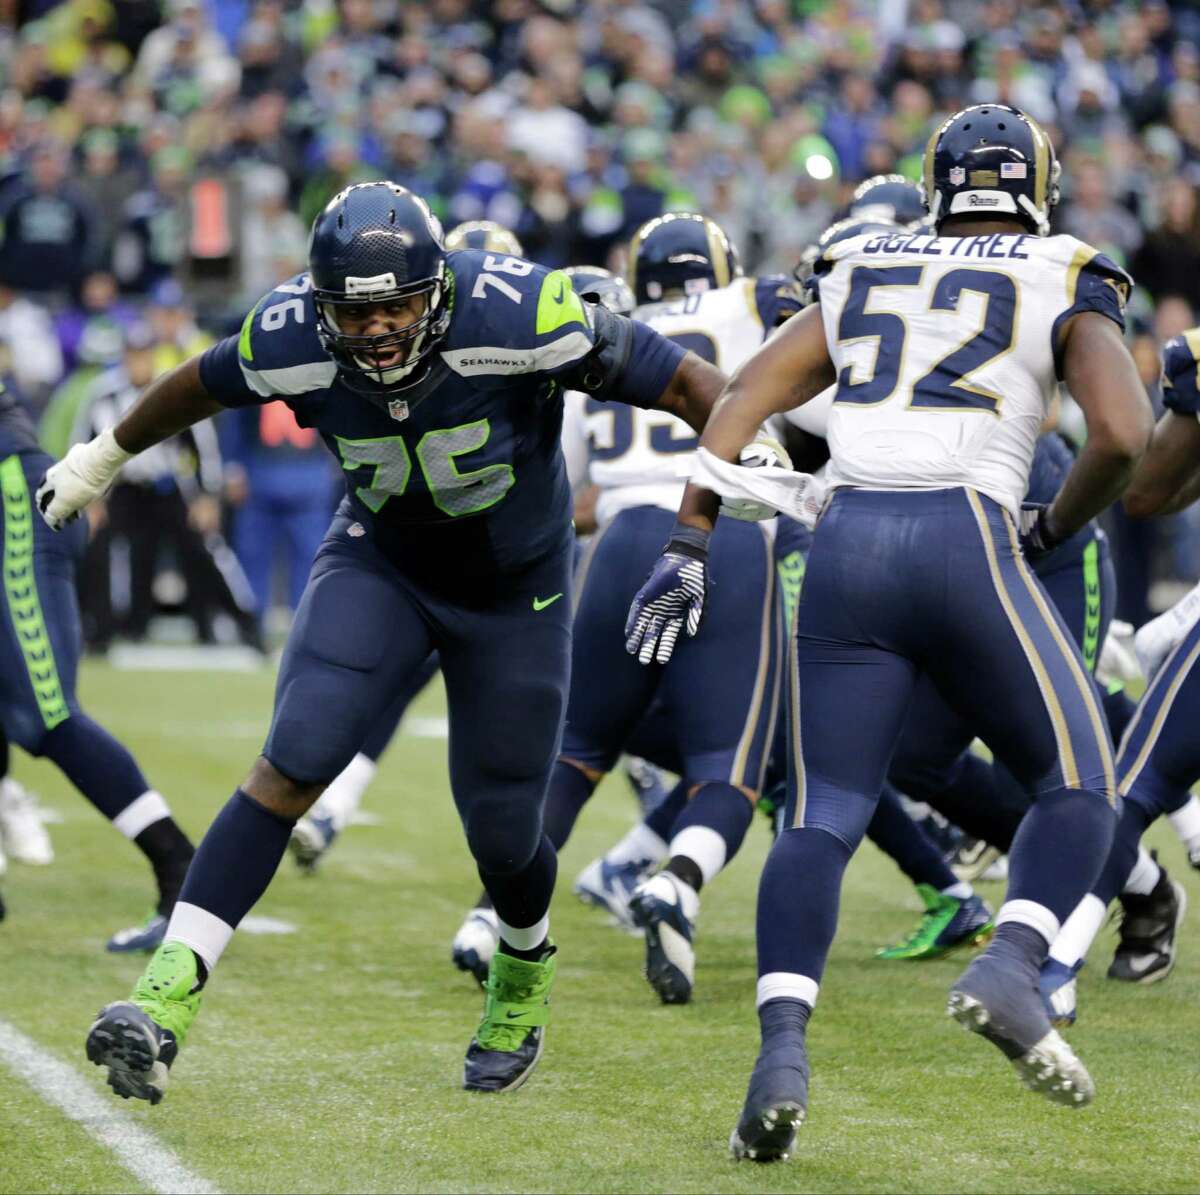 Seattle Seahawks offensive tackle Russell Okung squares off against St. Louis Rams linebacker Alec Ogletree in the second half of an NFL football game, Sunday, Dec. 28, 2014, in Seattle.